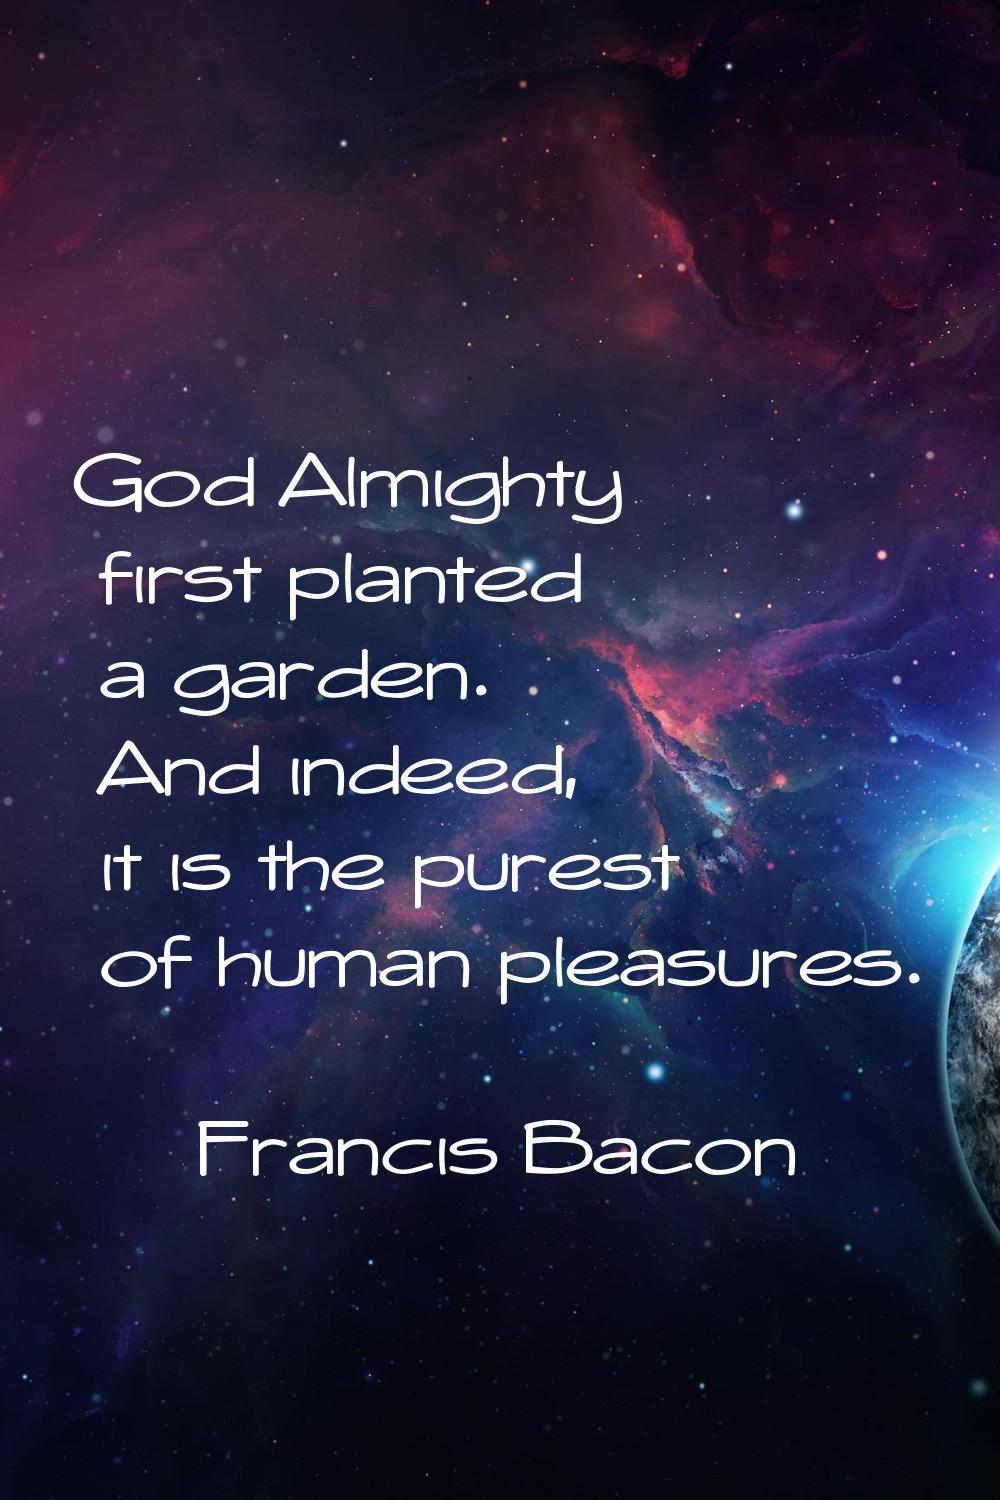 God Almighty first planted a garden. And indeed, it is the purest of human pleasures.